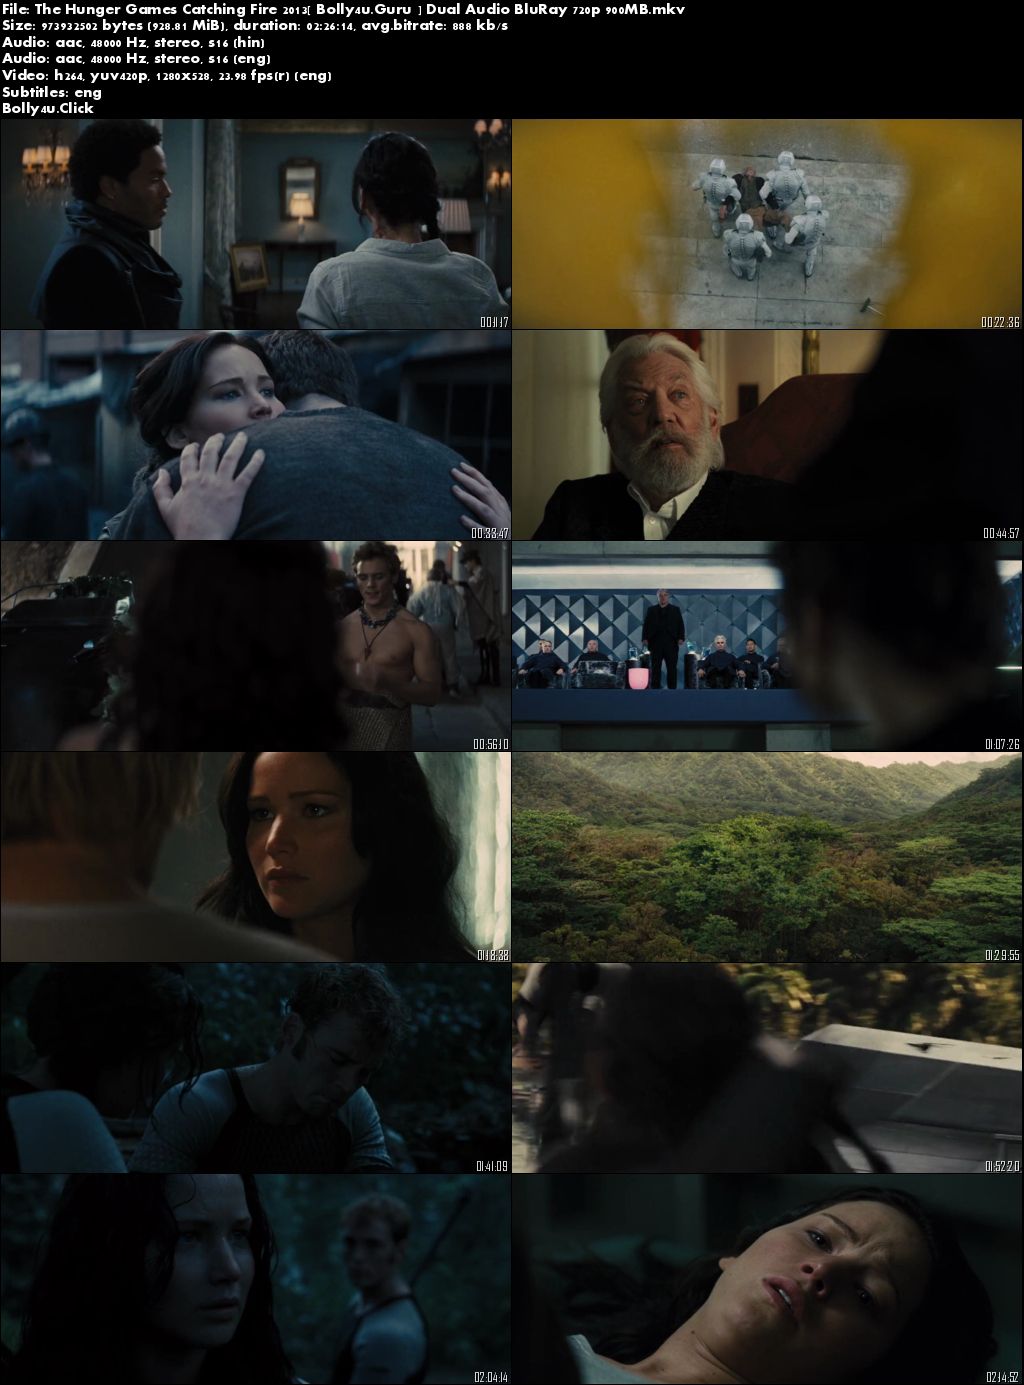 The Hunger Games Catching Fire 2013 BRRip 450Mb Hindi Dual Audio 480p Download